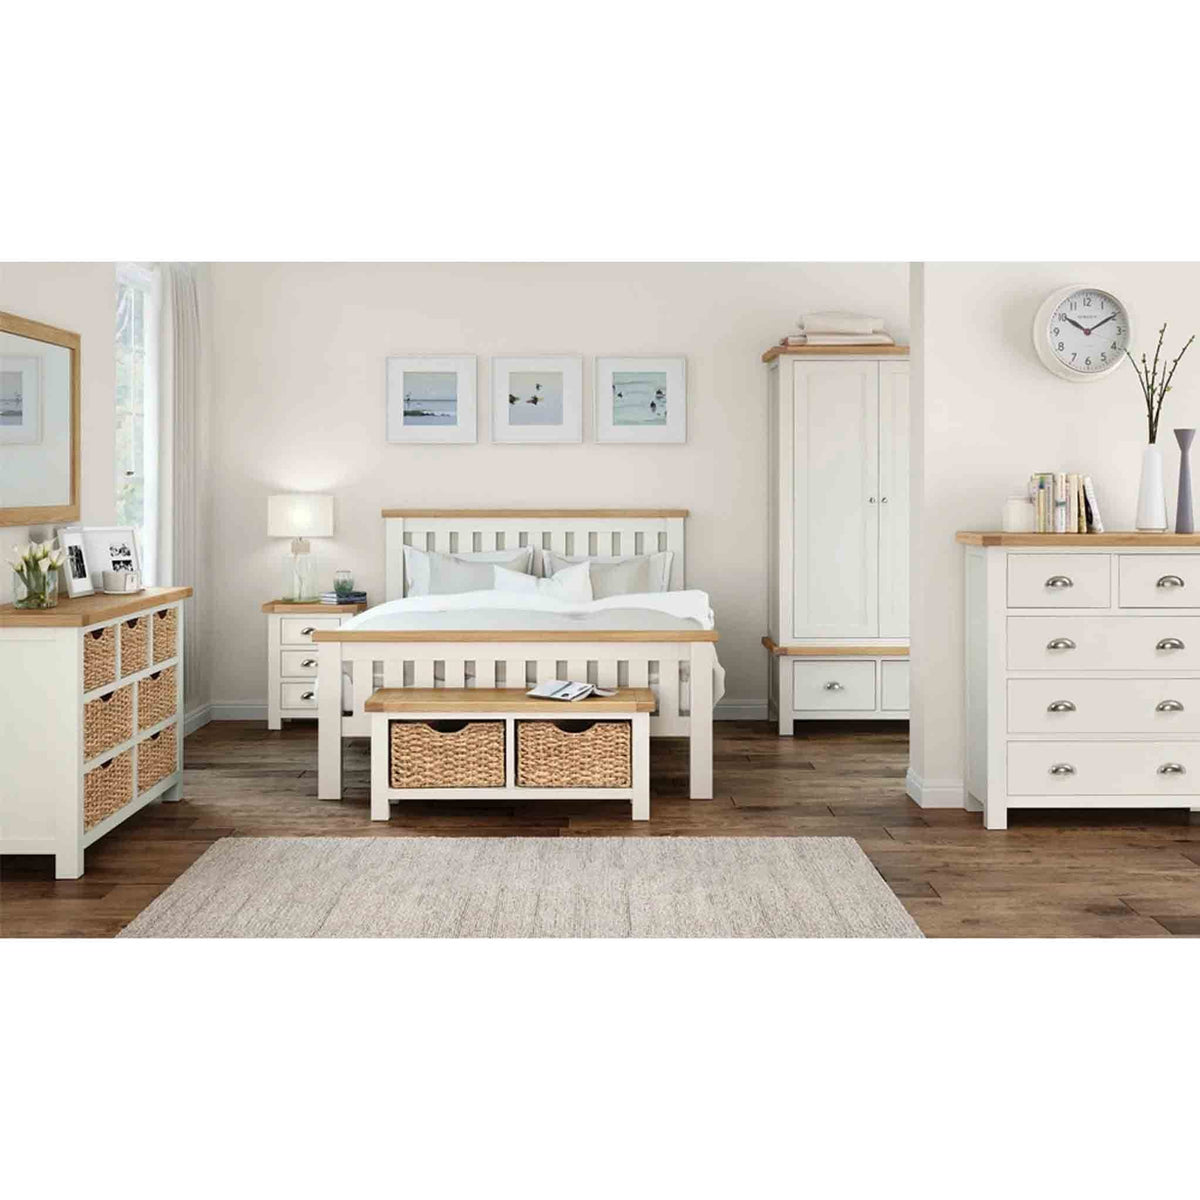 Decorative room image with The Daymer Cream 2 Door Double Wardrobe